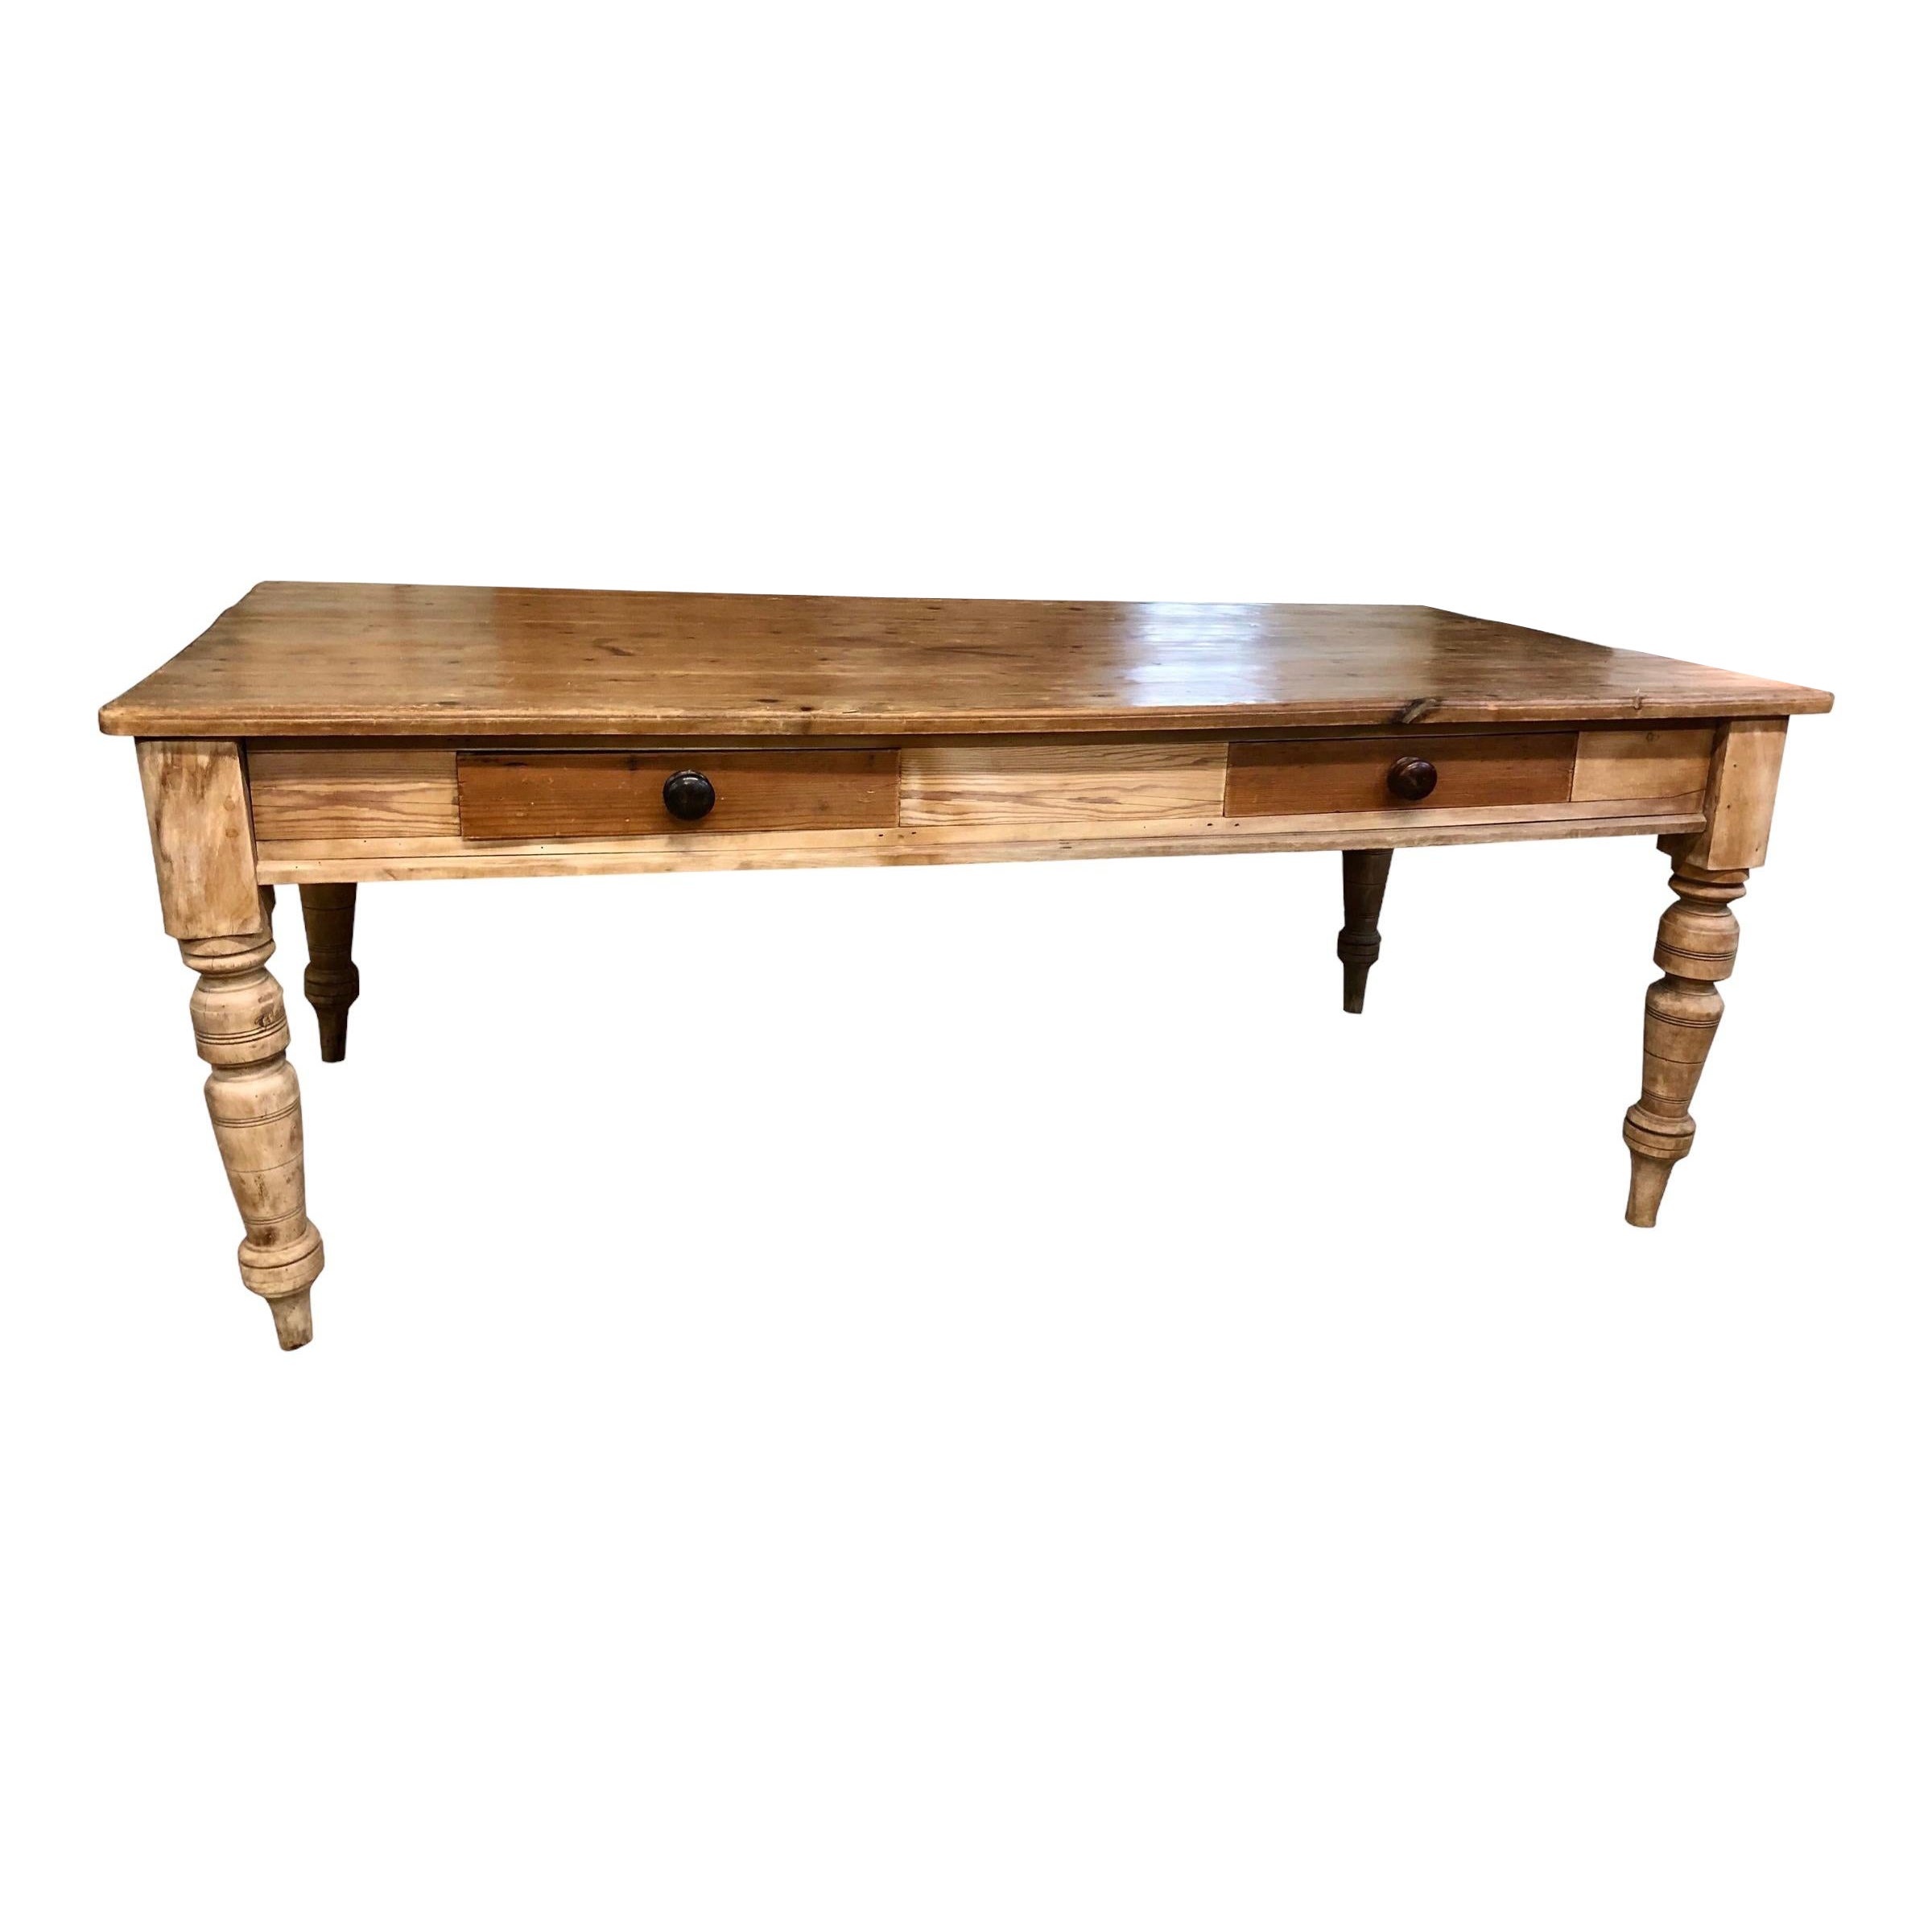 English Country Pine Farm Table For Sale